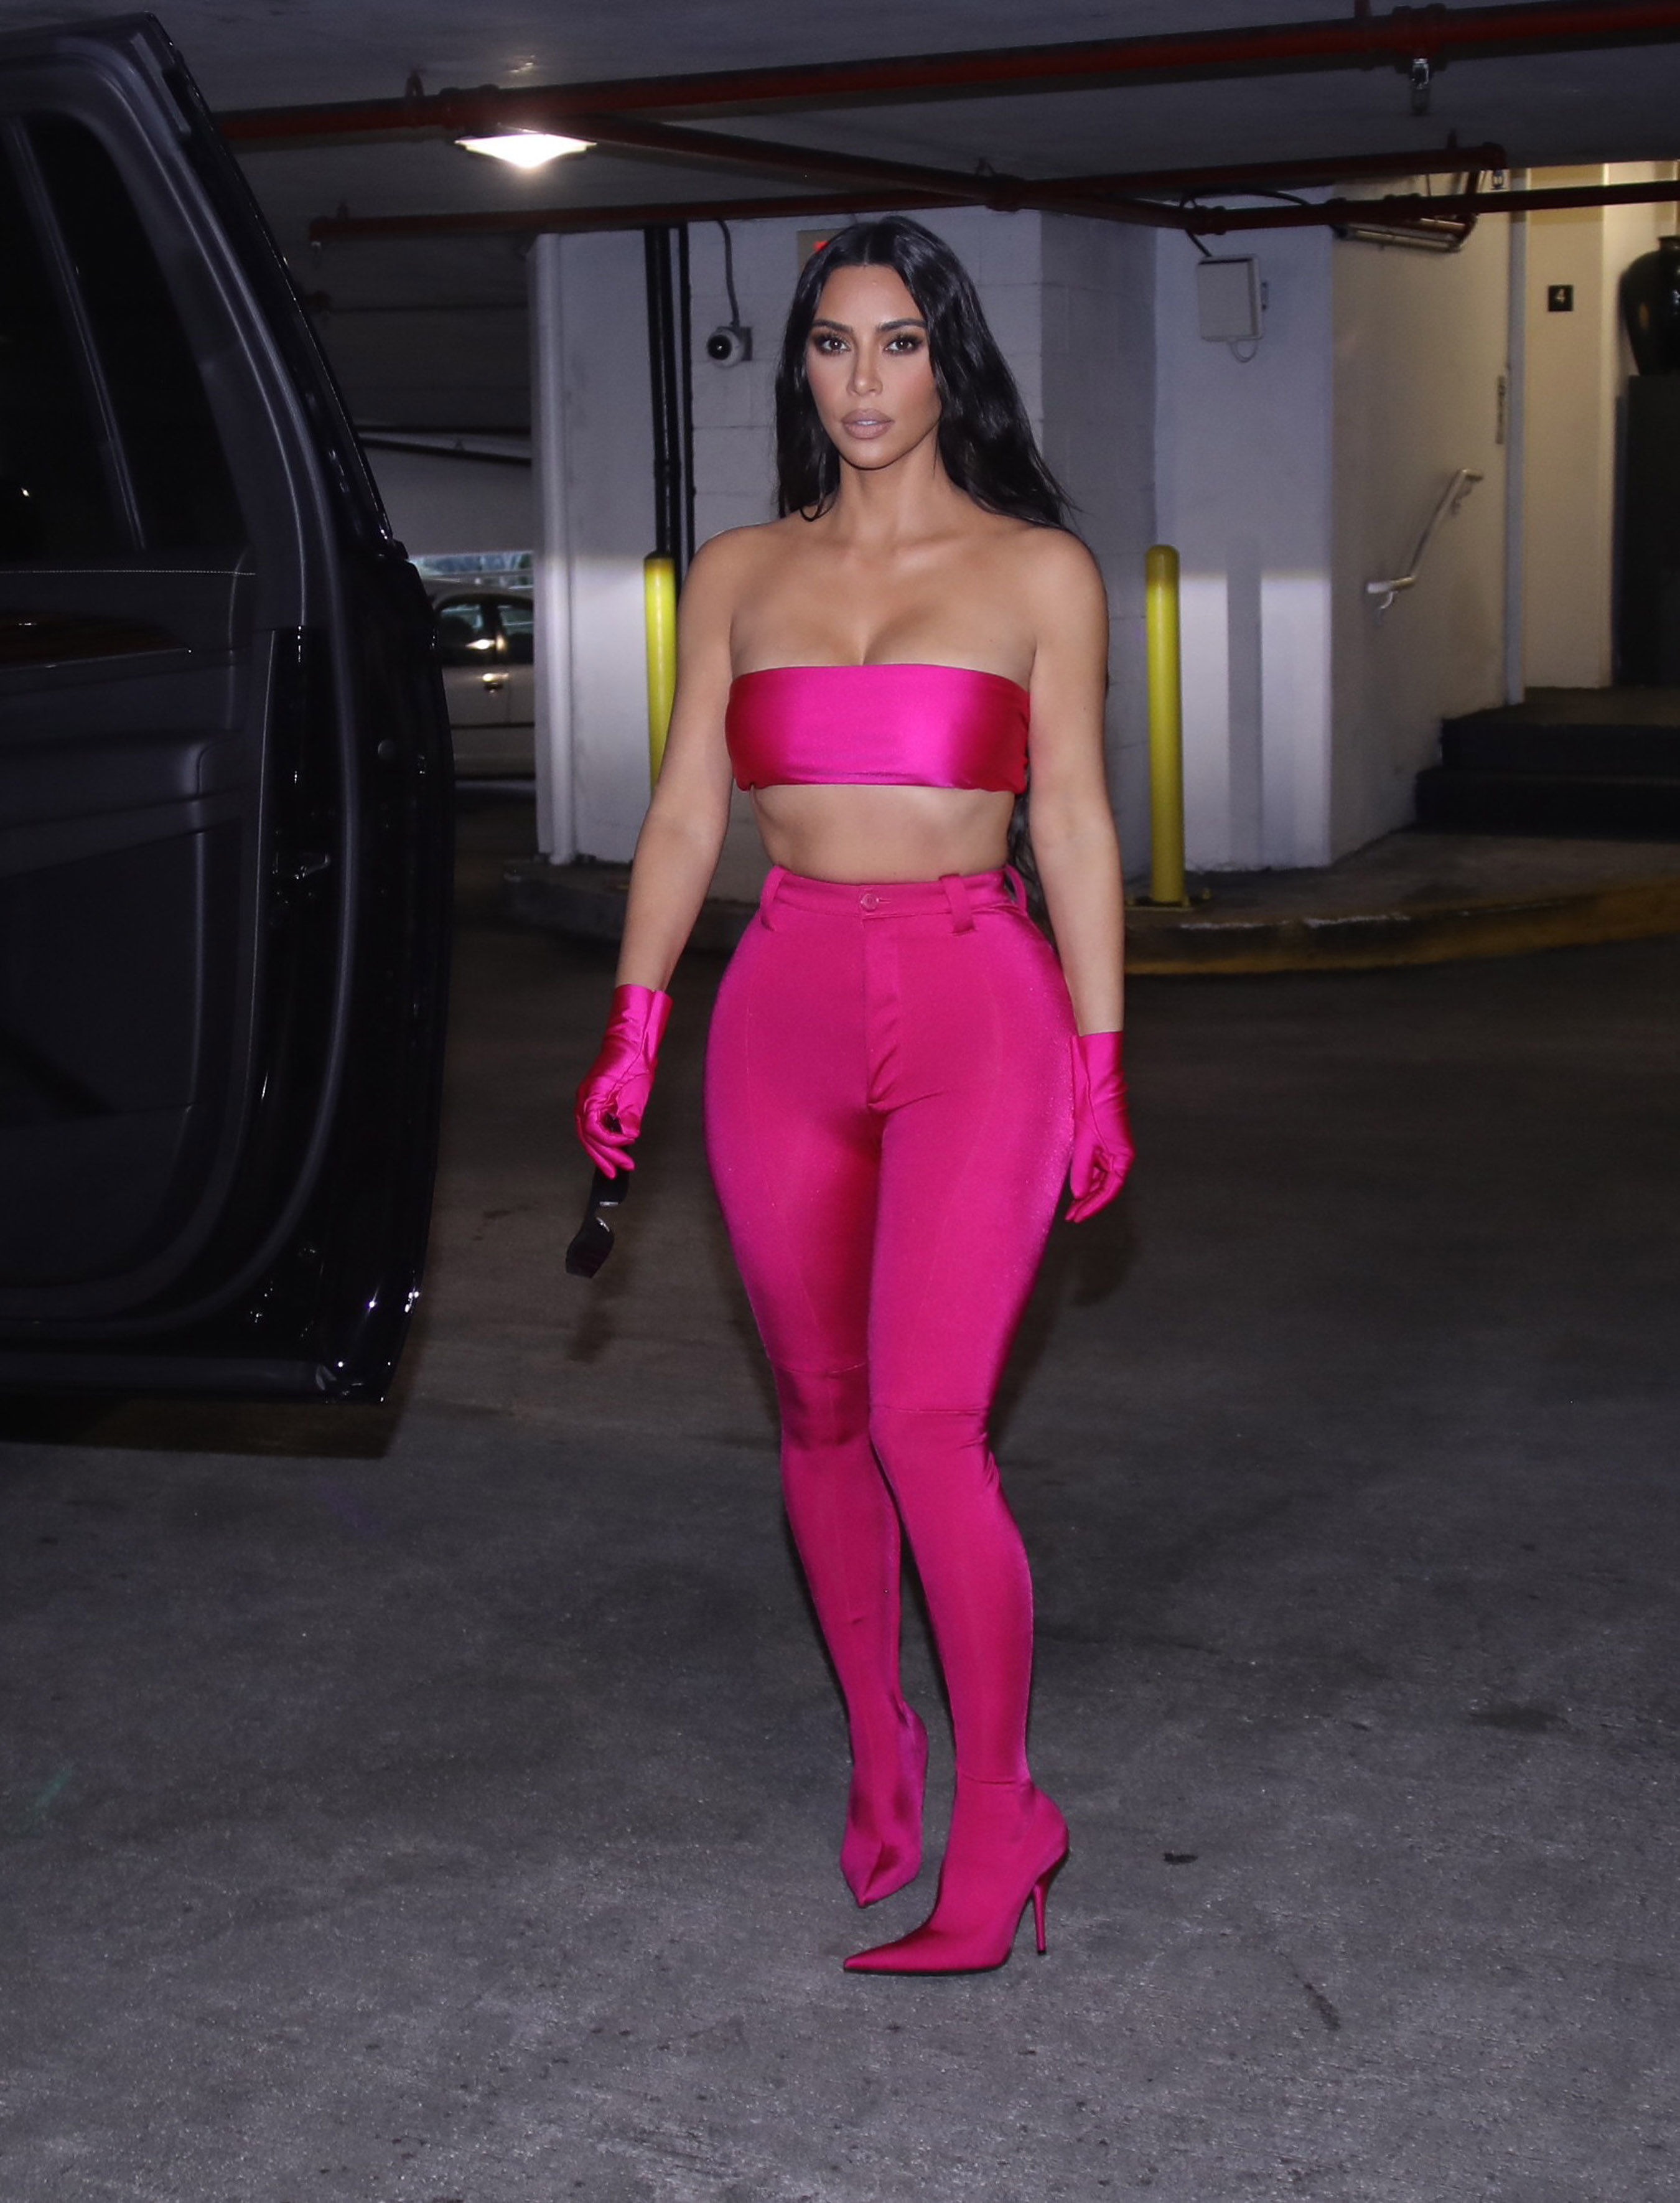 KimKardashian gets dressed at home with the Mid Support Tights